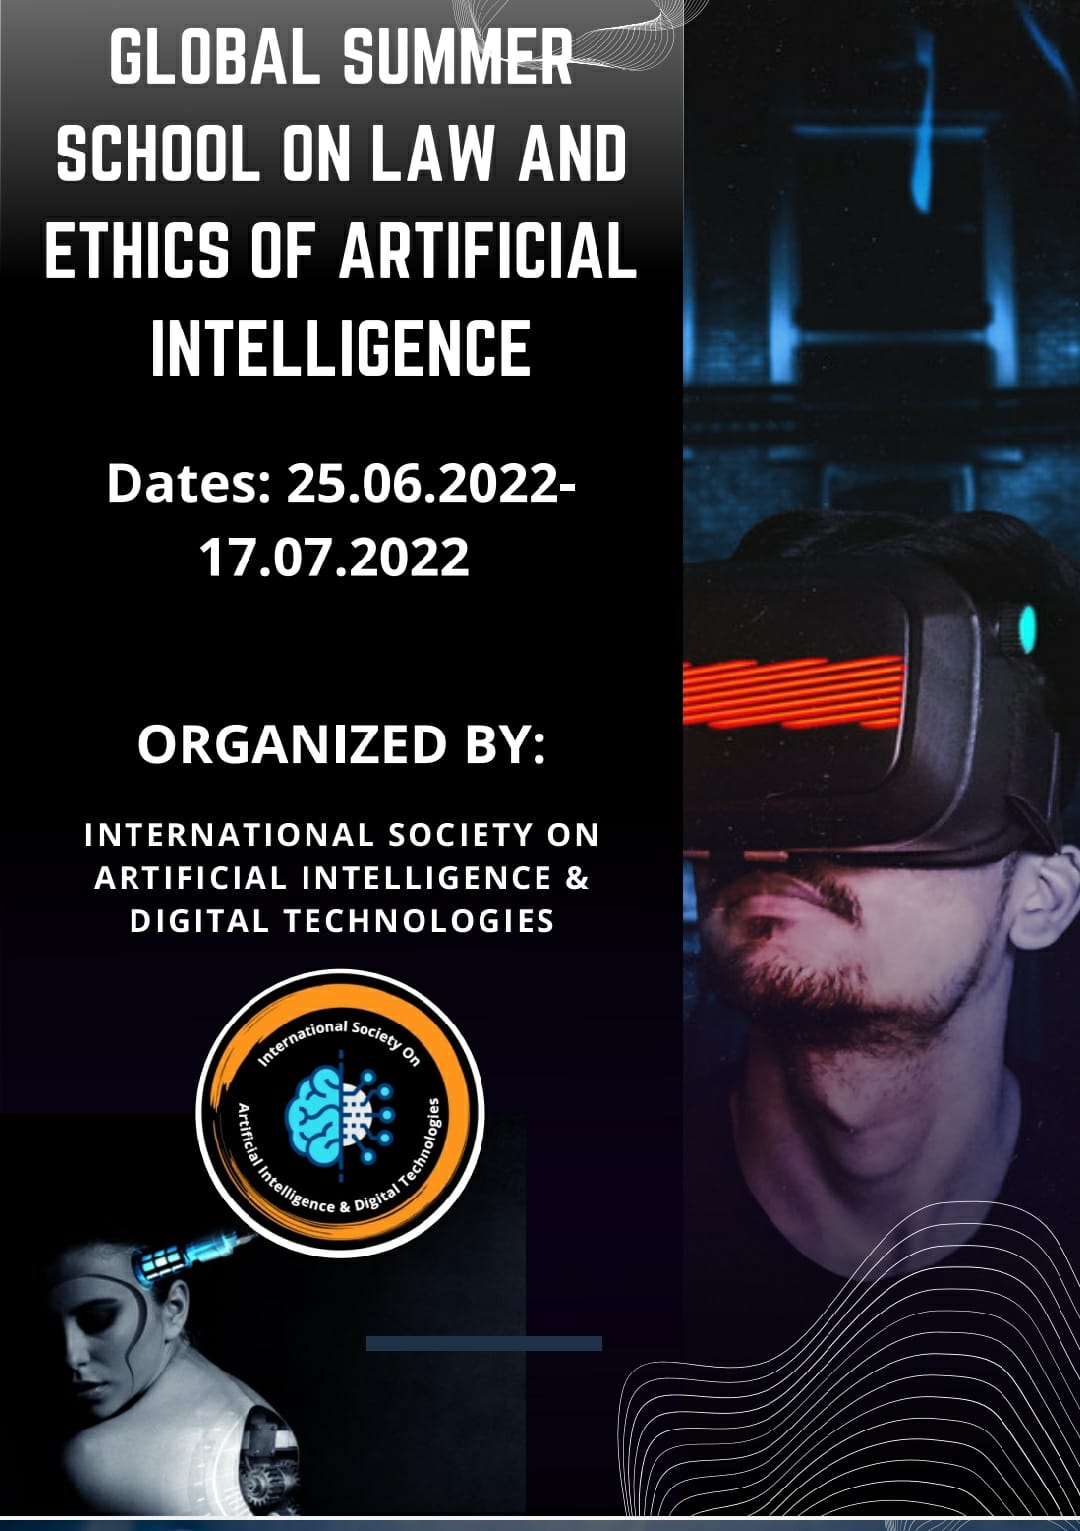 GLOBAL SUMMER SCHOOL ON LAW AND ETHICS OF ARTIFICIAL INTELLIGENCE ON 25 JUNE 2022-17JULY 2022